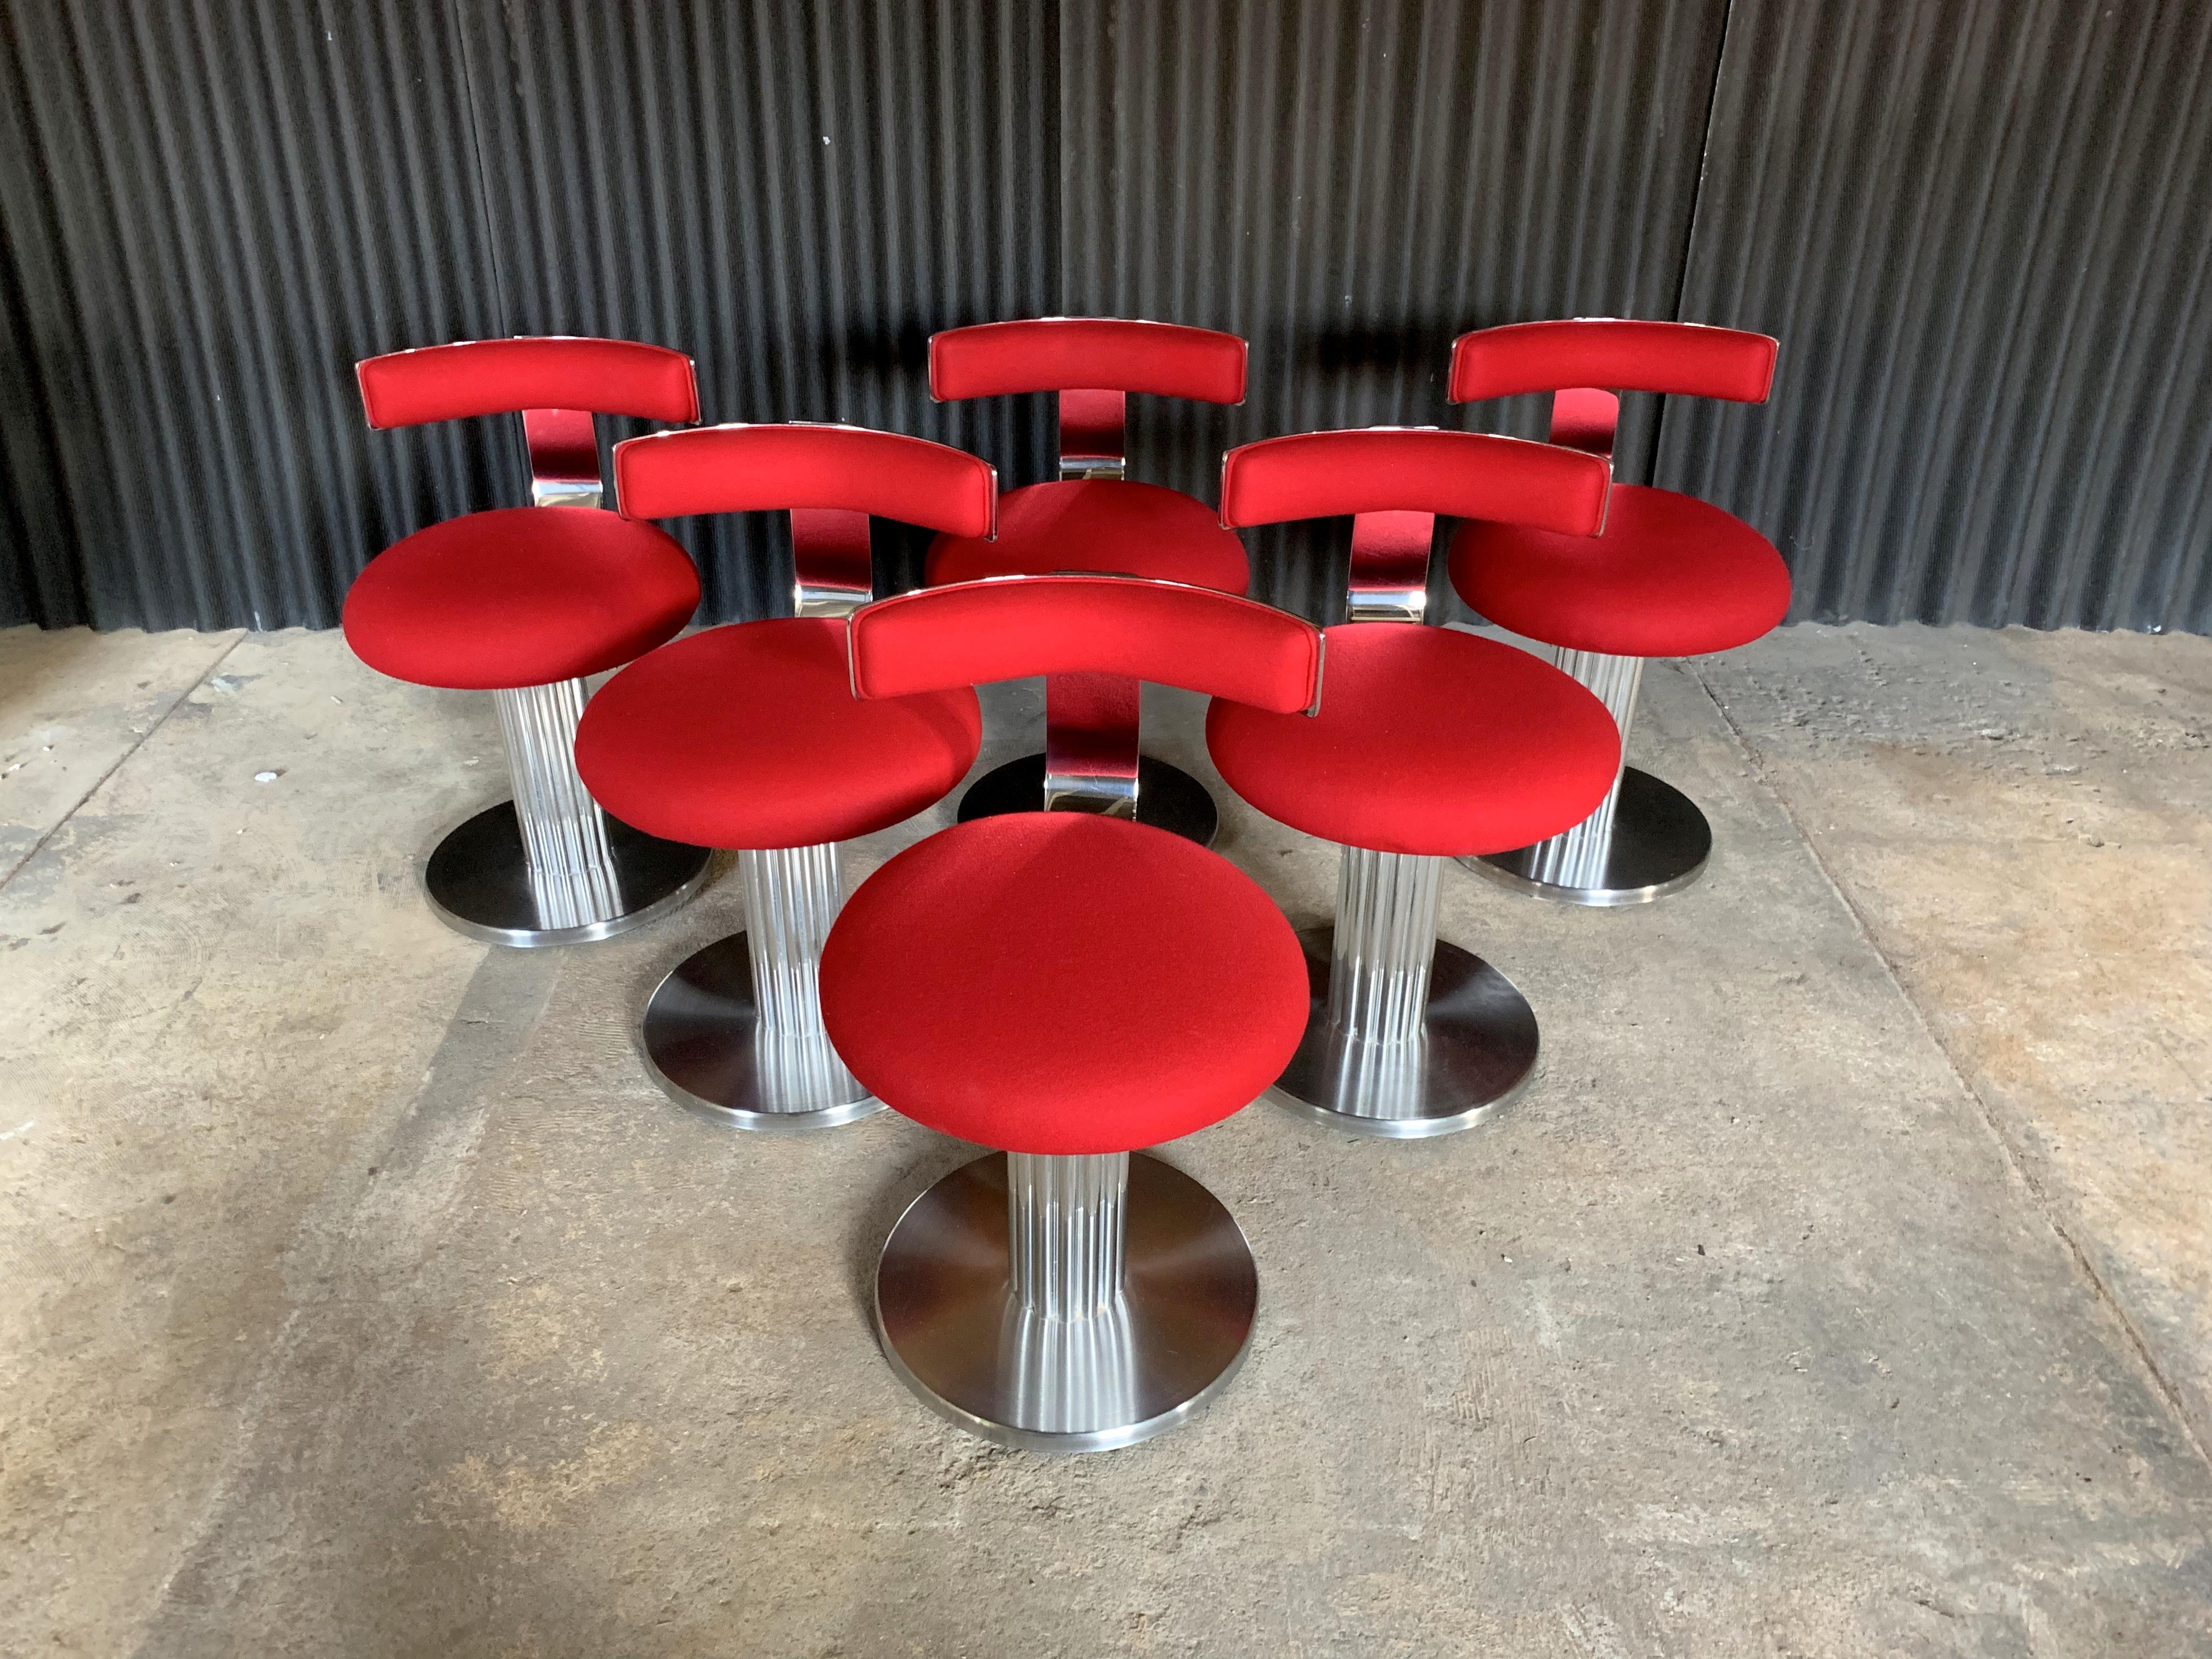 The most incredible set that you've ever seen! These are the best the 1980s produced!
Each chair is in excellent condition with no dents or noticeable wear. Obviously, these set was used very little and kept immaculate. It came with a coordinating